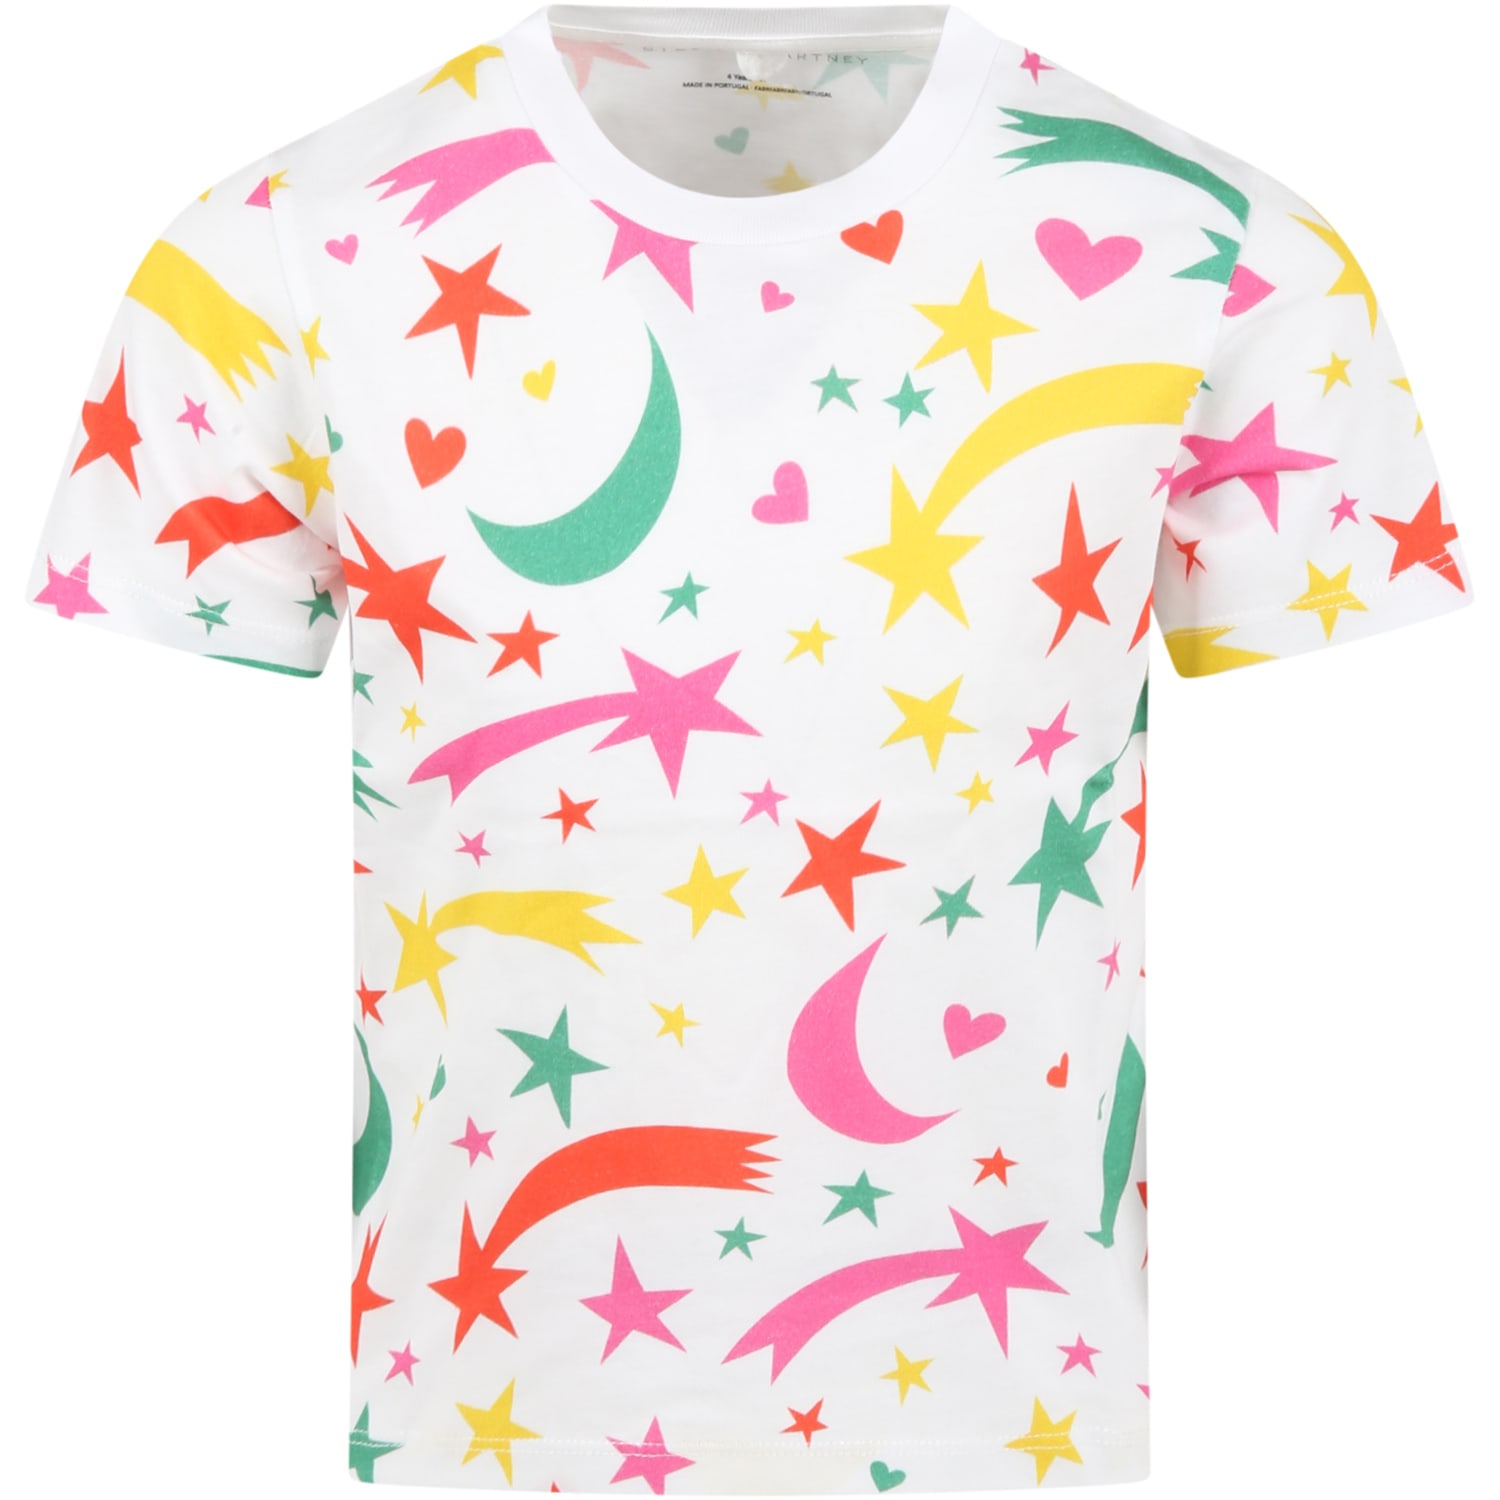 STELLA MCCARTNEY WHITE T-SHIRT FOR GIRL WITH COLORFUL STARS, MOONS AND HEARTS